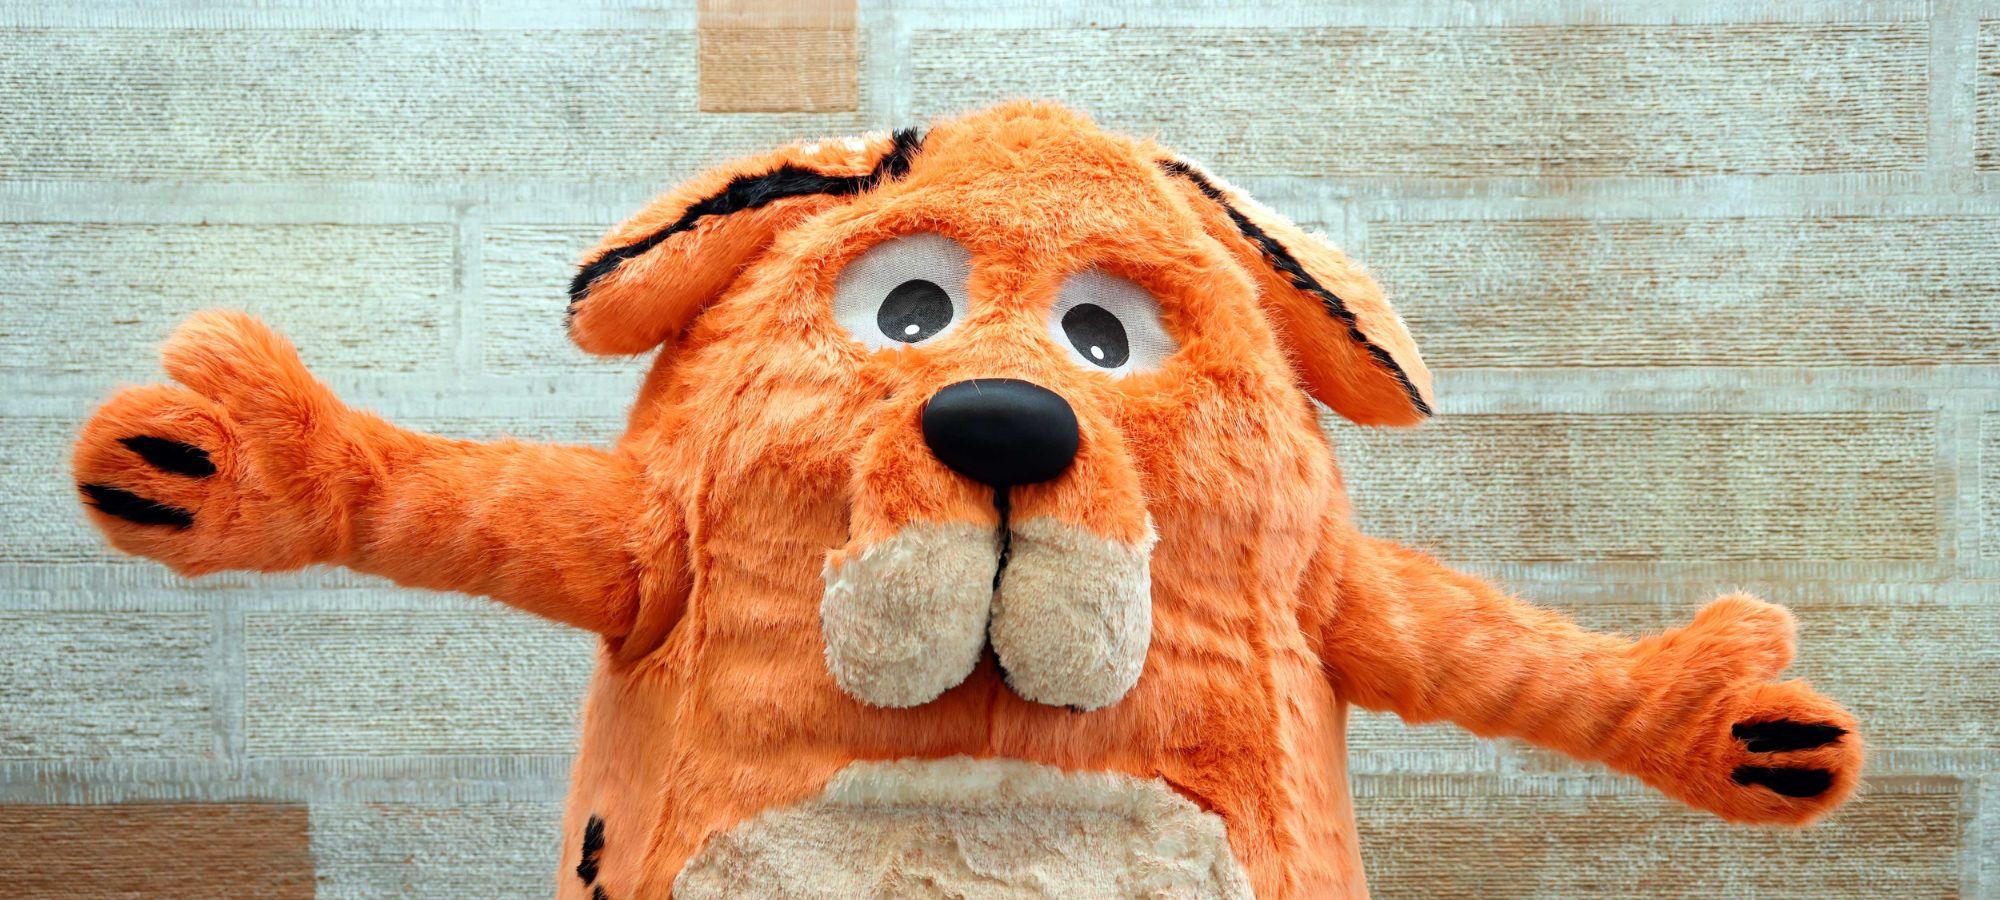 The Big Dog mascot, a large and fluffy orange dog, from the children's book festival in Dumfries.